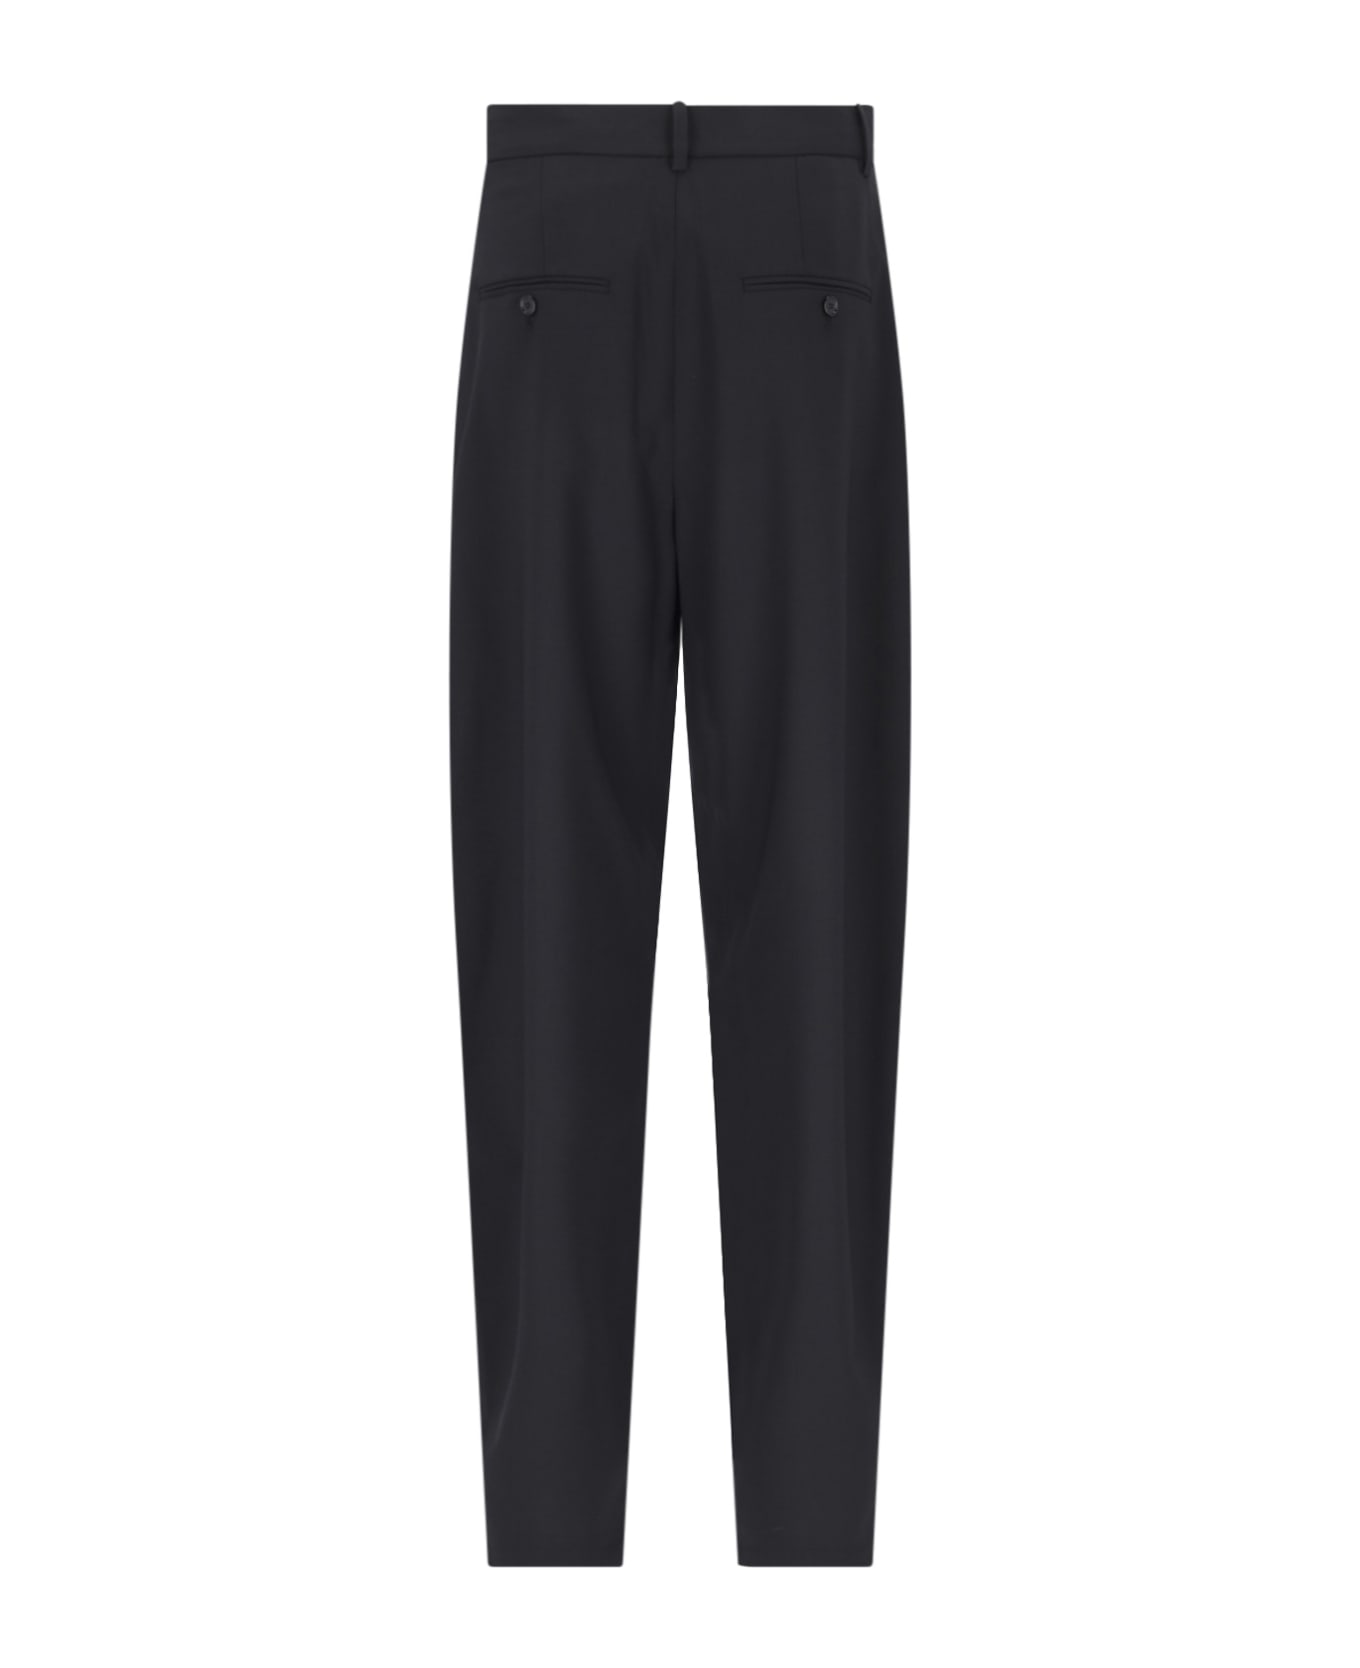 Isabel Marant Pleated Tailored Trousers - Black